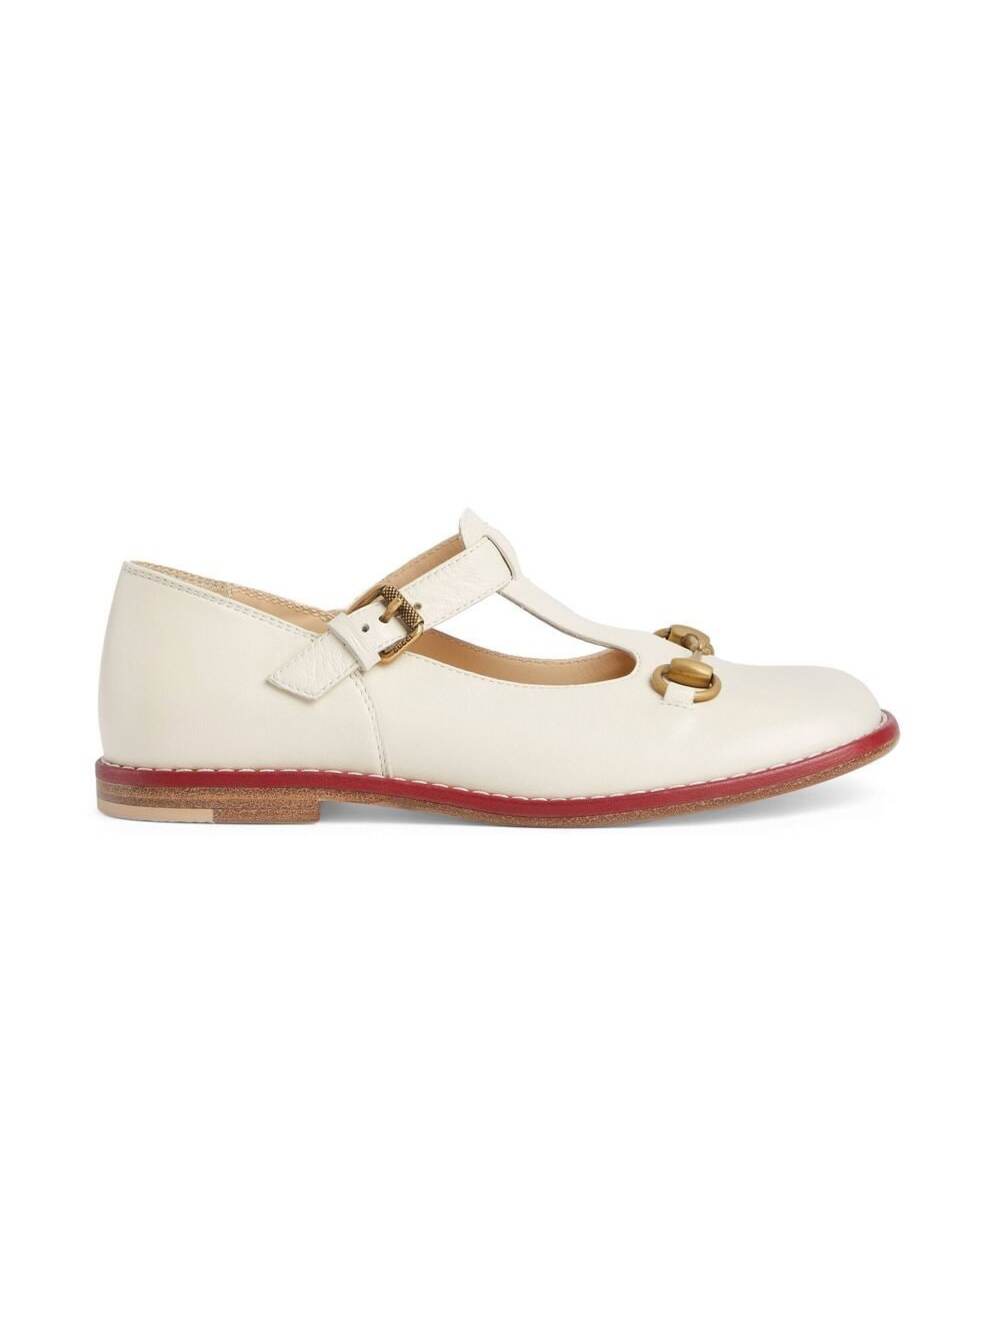 GUCCI WHITE BALLET FLATS WITH MORSETTO DETAIL IN LEATHER GIRL